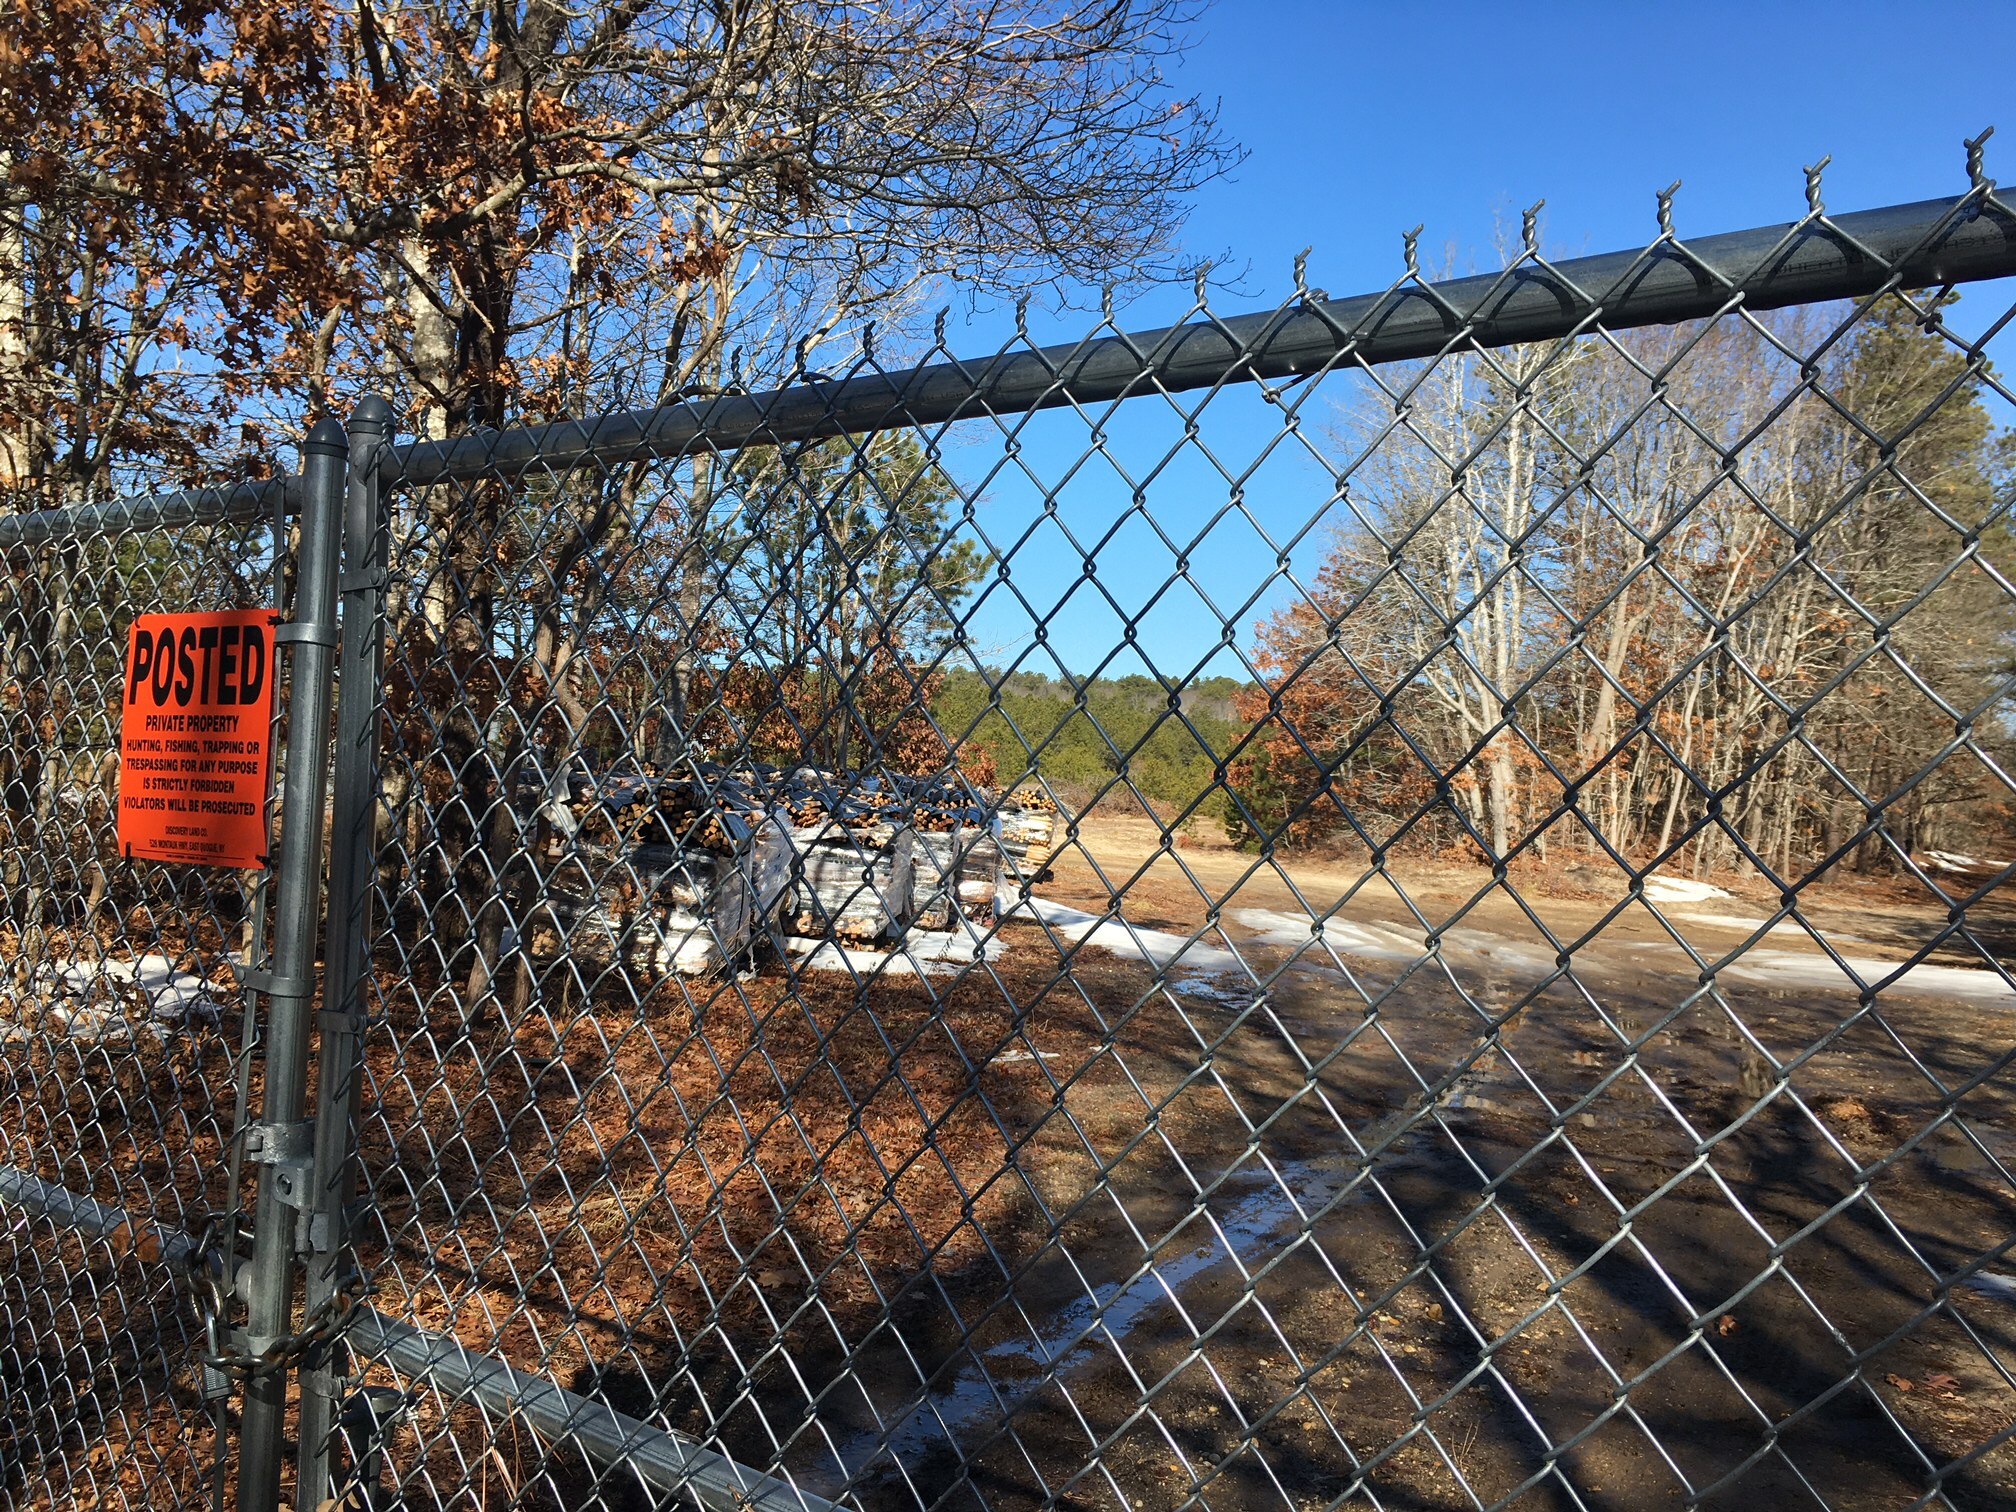 One of the entrances to the Lewis Road resort, off Spinney Road in East Quogue. after years of review, it was approved by the Southampton Town Planning Board in a split vote on December 8.